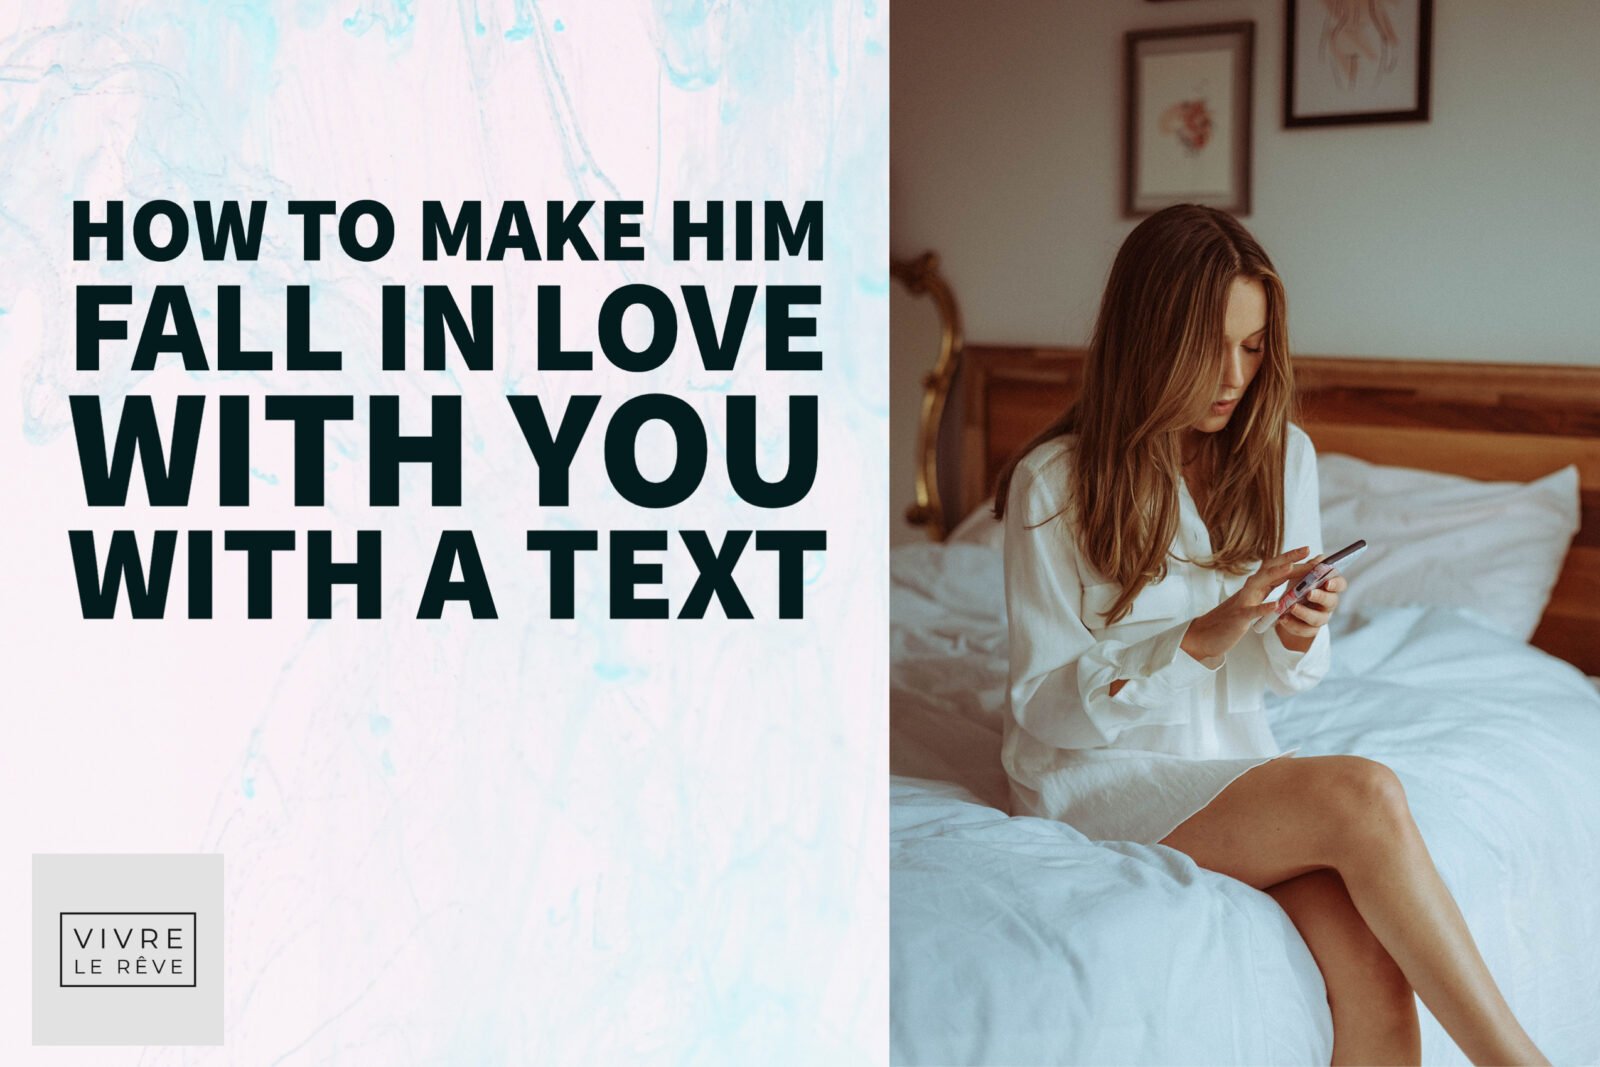 How to Make Him Fall in Love With You With a Text Vivre Le Rêve